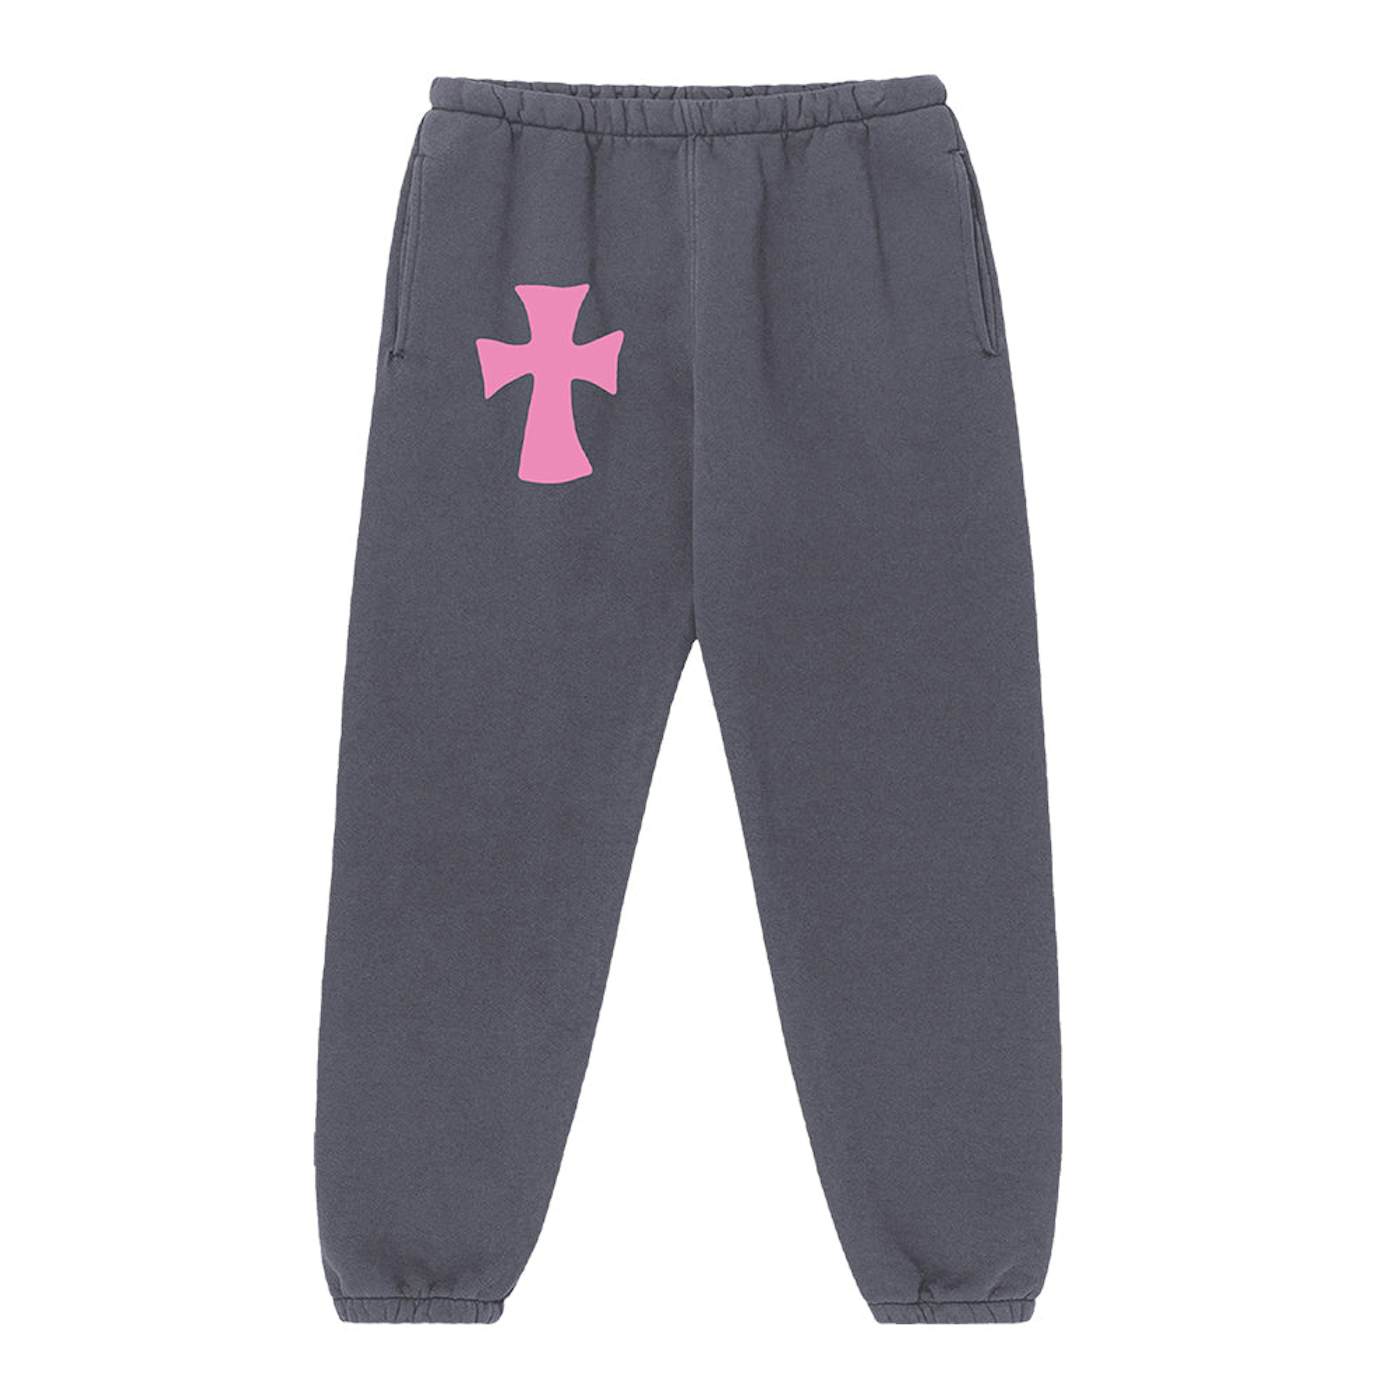 I LUV GUAP Flared Sweatpants (ORDER 1 SIZE UP 4 BAGGIER FIT